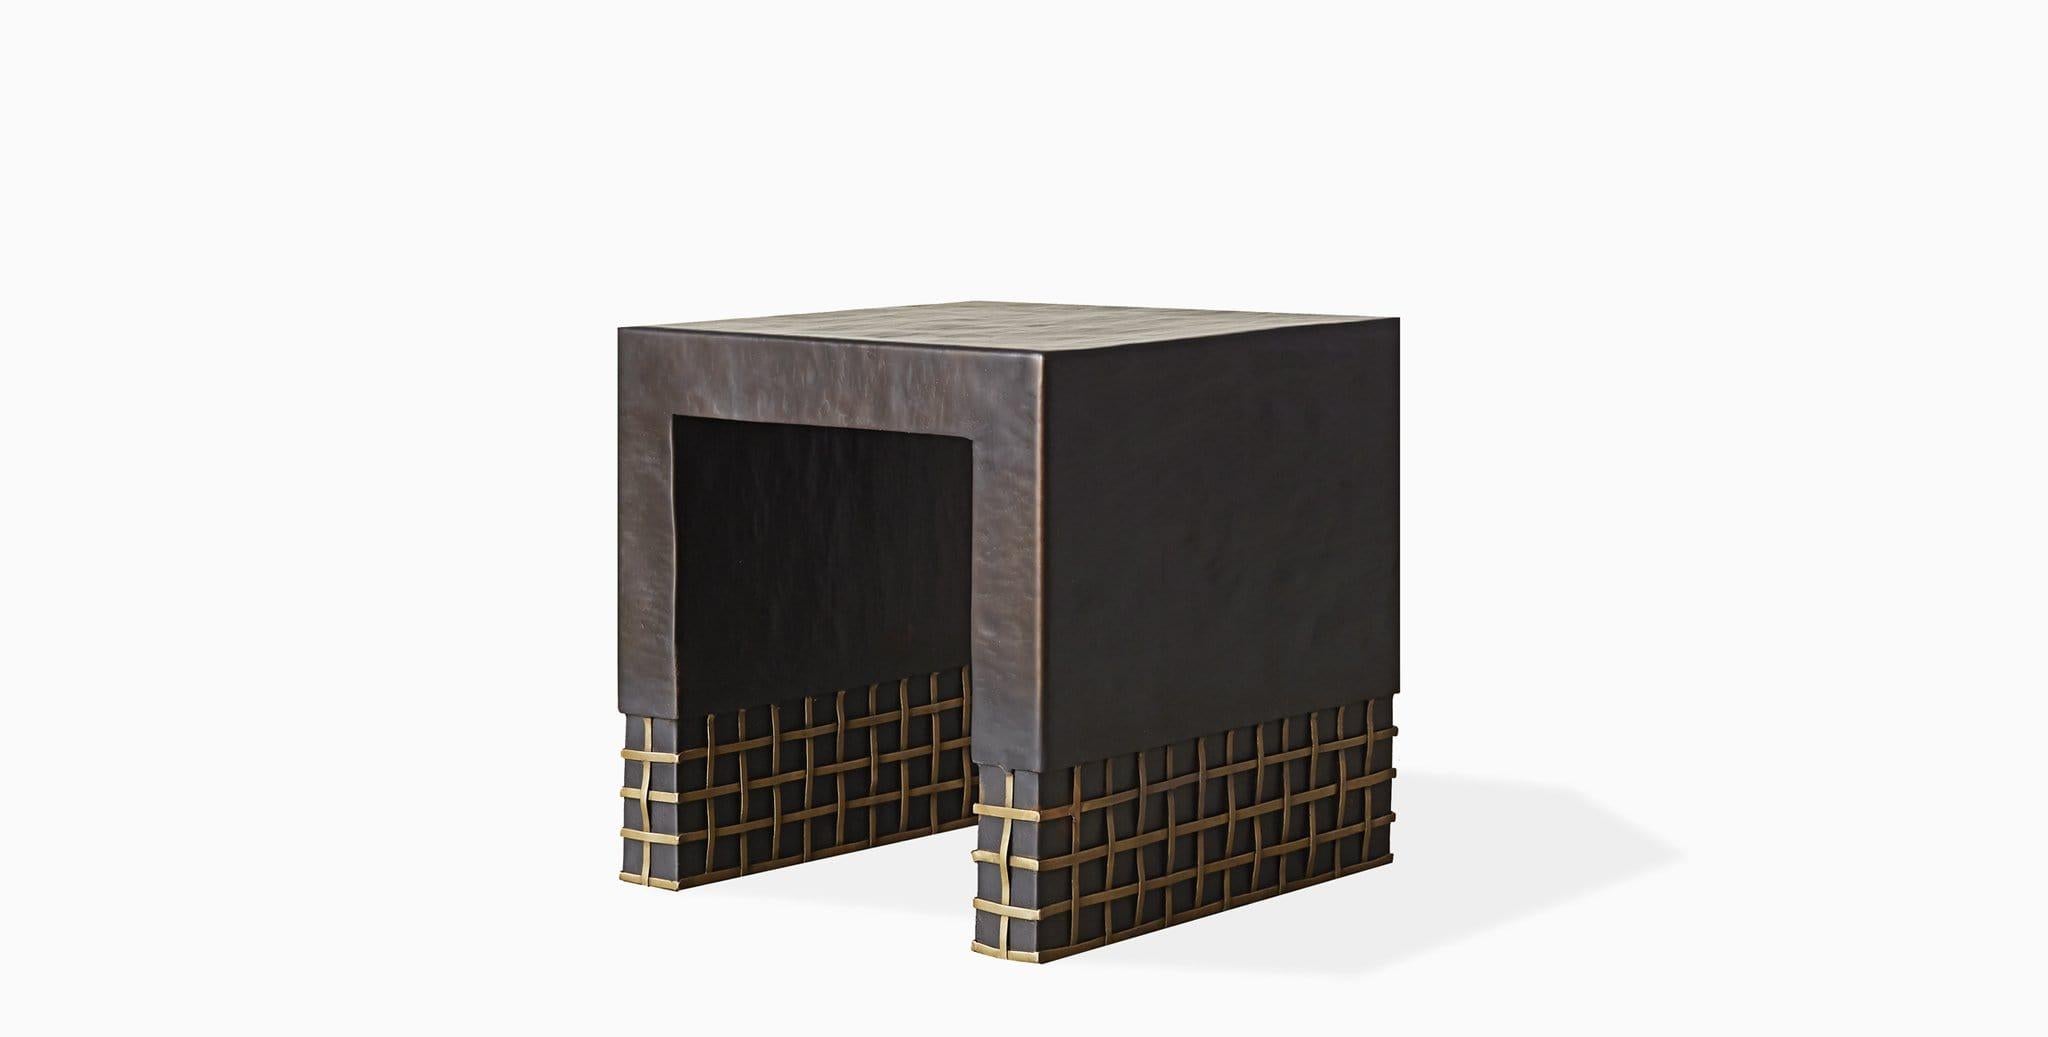 The Crawford Accent Table creates huge visual impact with its black forged steel waterfall body appealingly contrasted with an open weave brass base detail making it an unforgettable addition to your space.

Iron frame with Black Steel